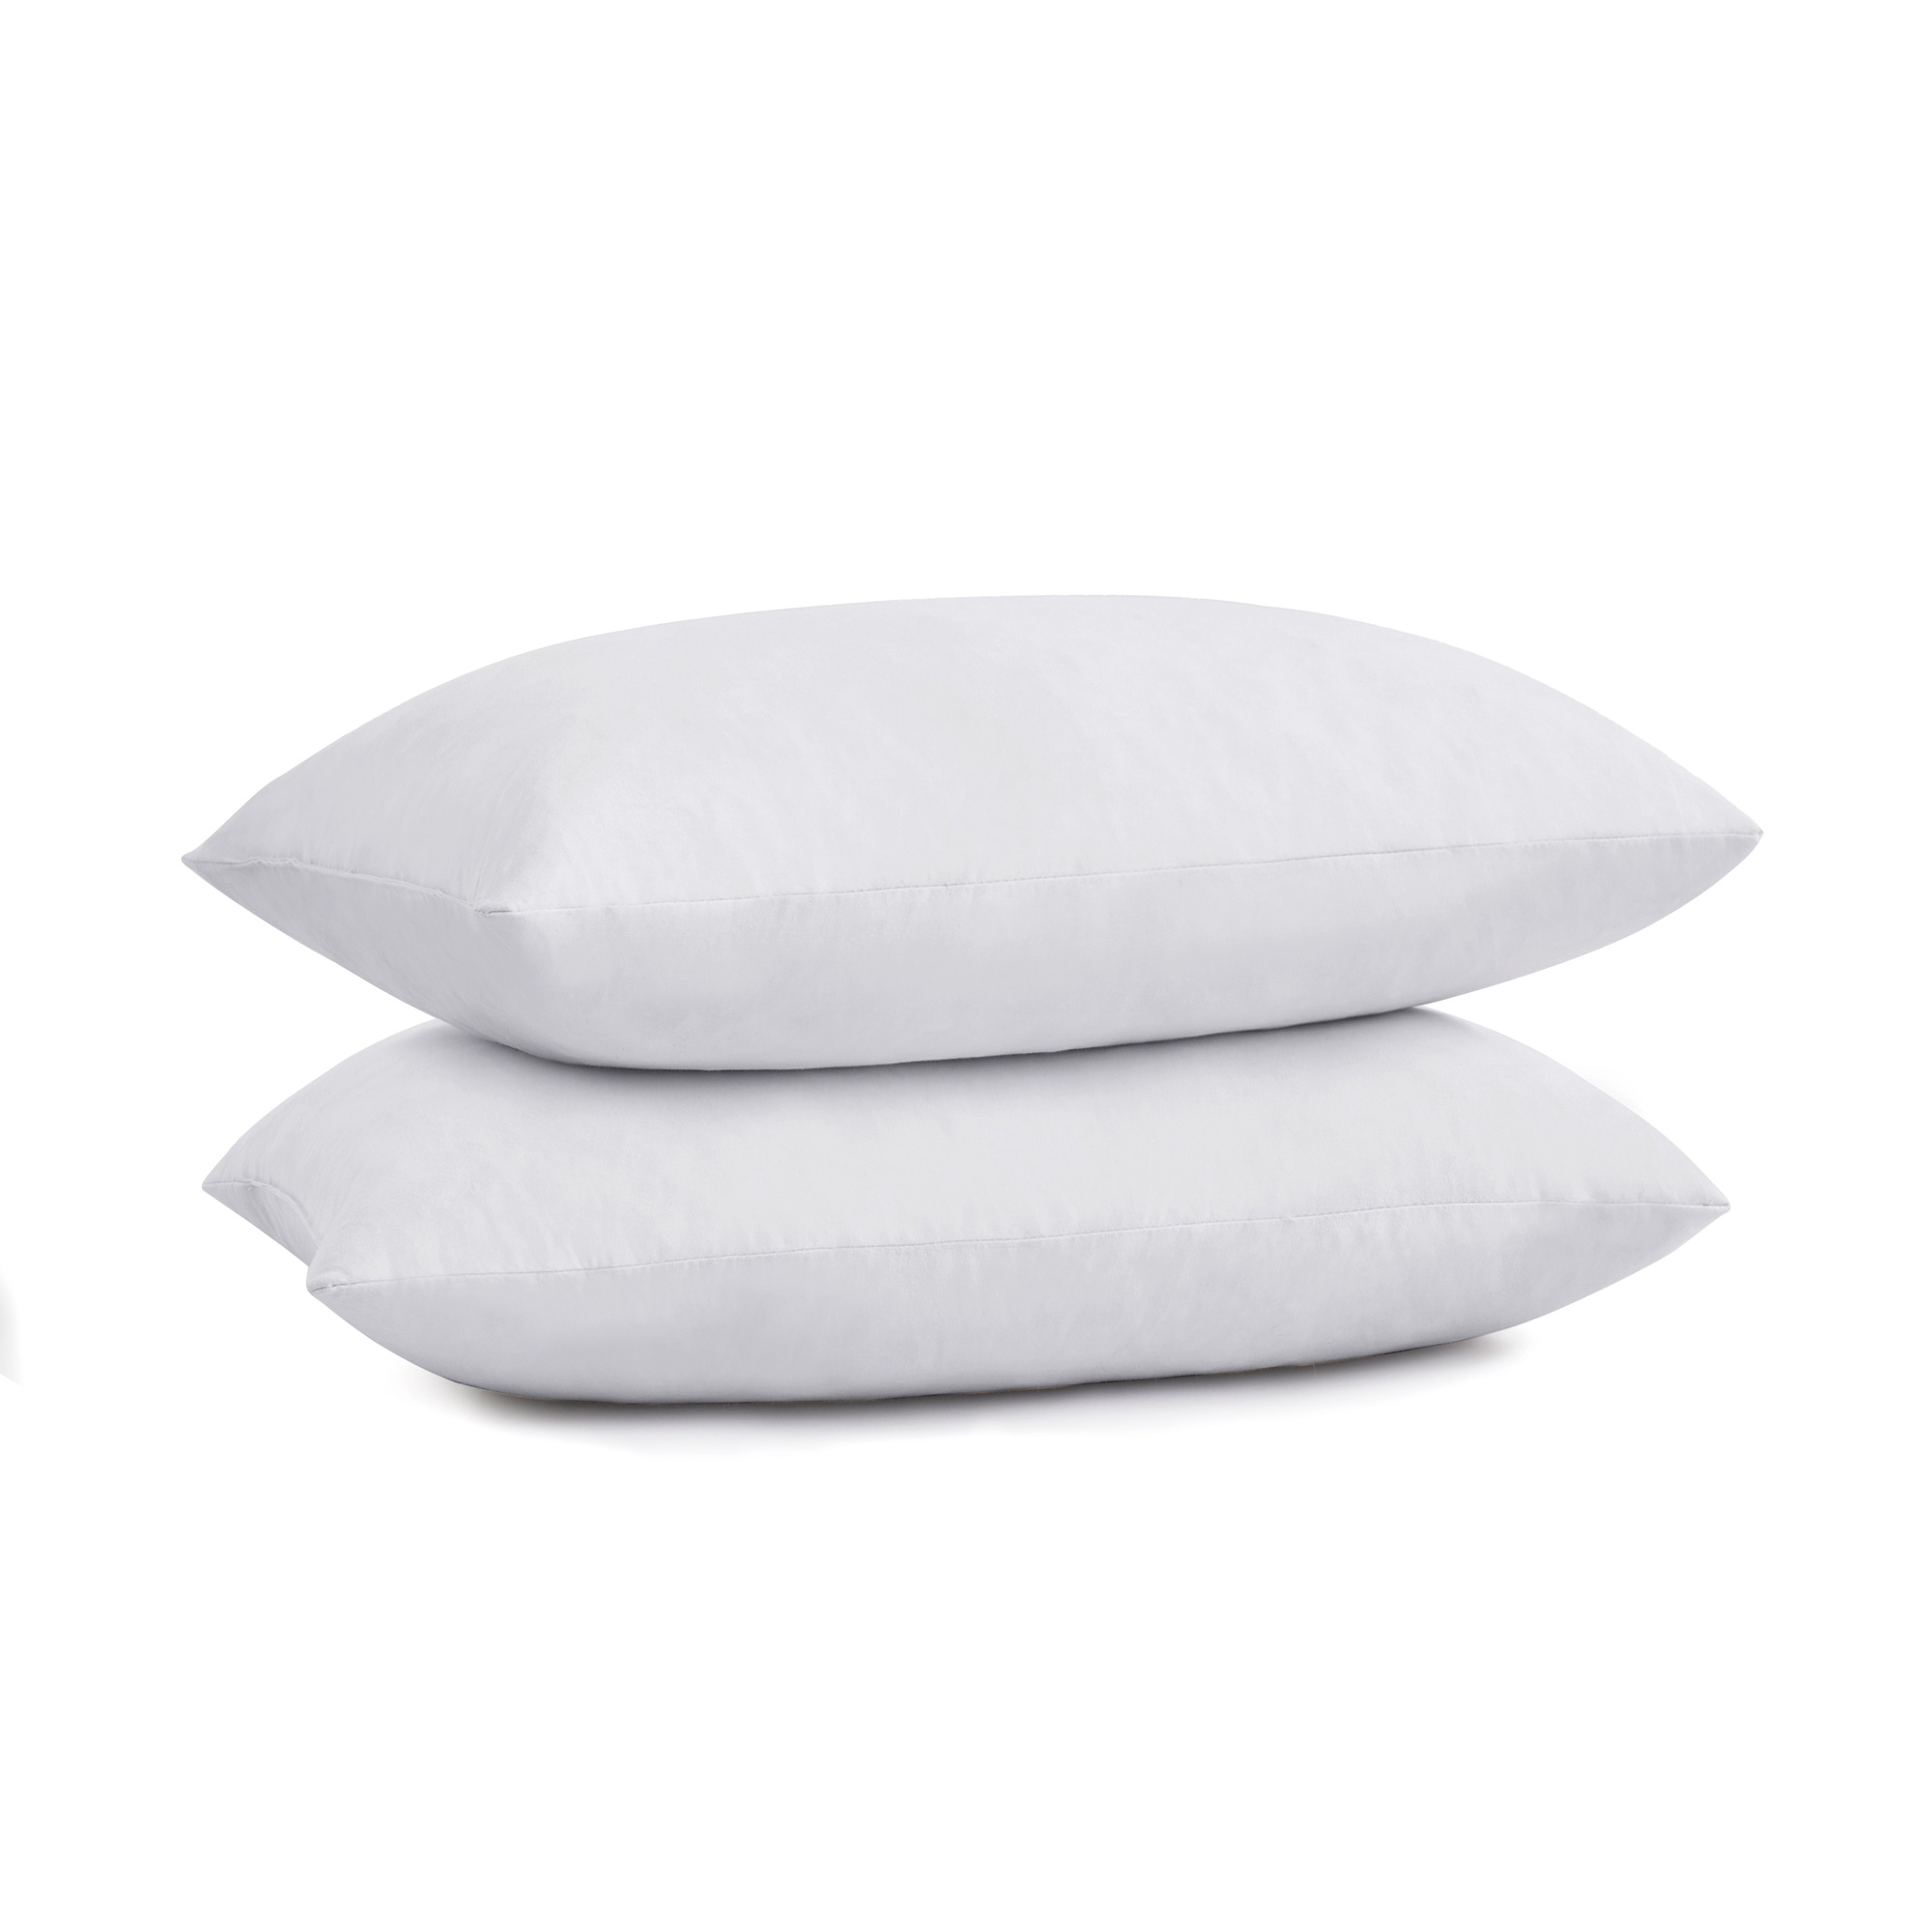 White Feather Pillows For Sleeping, Square Bed Pillows 12 X 20 Inch, 18 X 18 Inch, 20 X 20 Inch, 26 X 26 Inch, Set Of 2 - 12 By 20, White